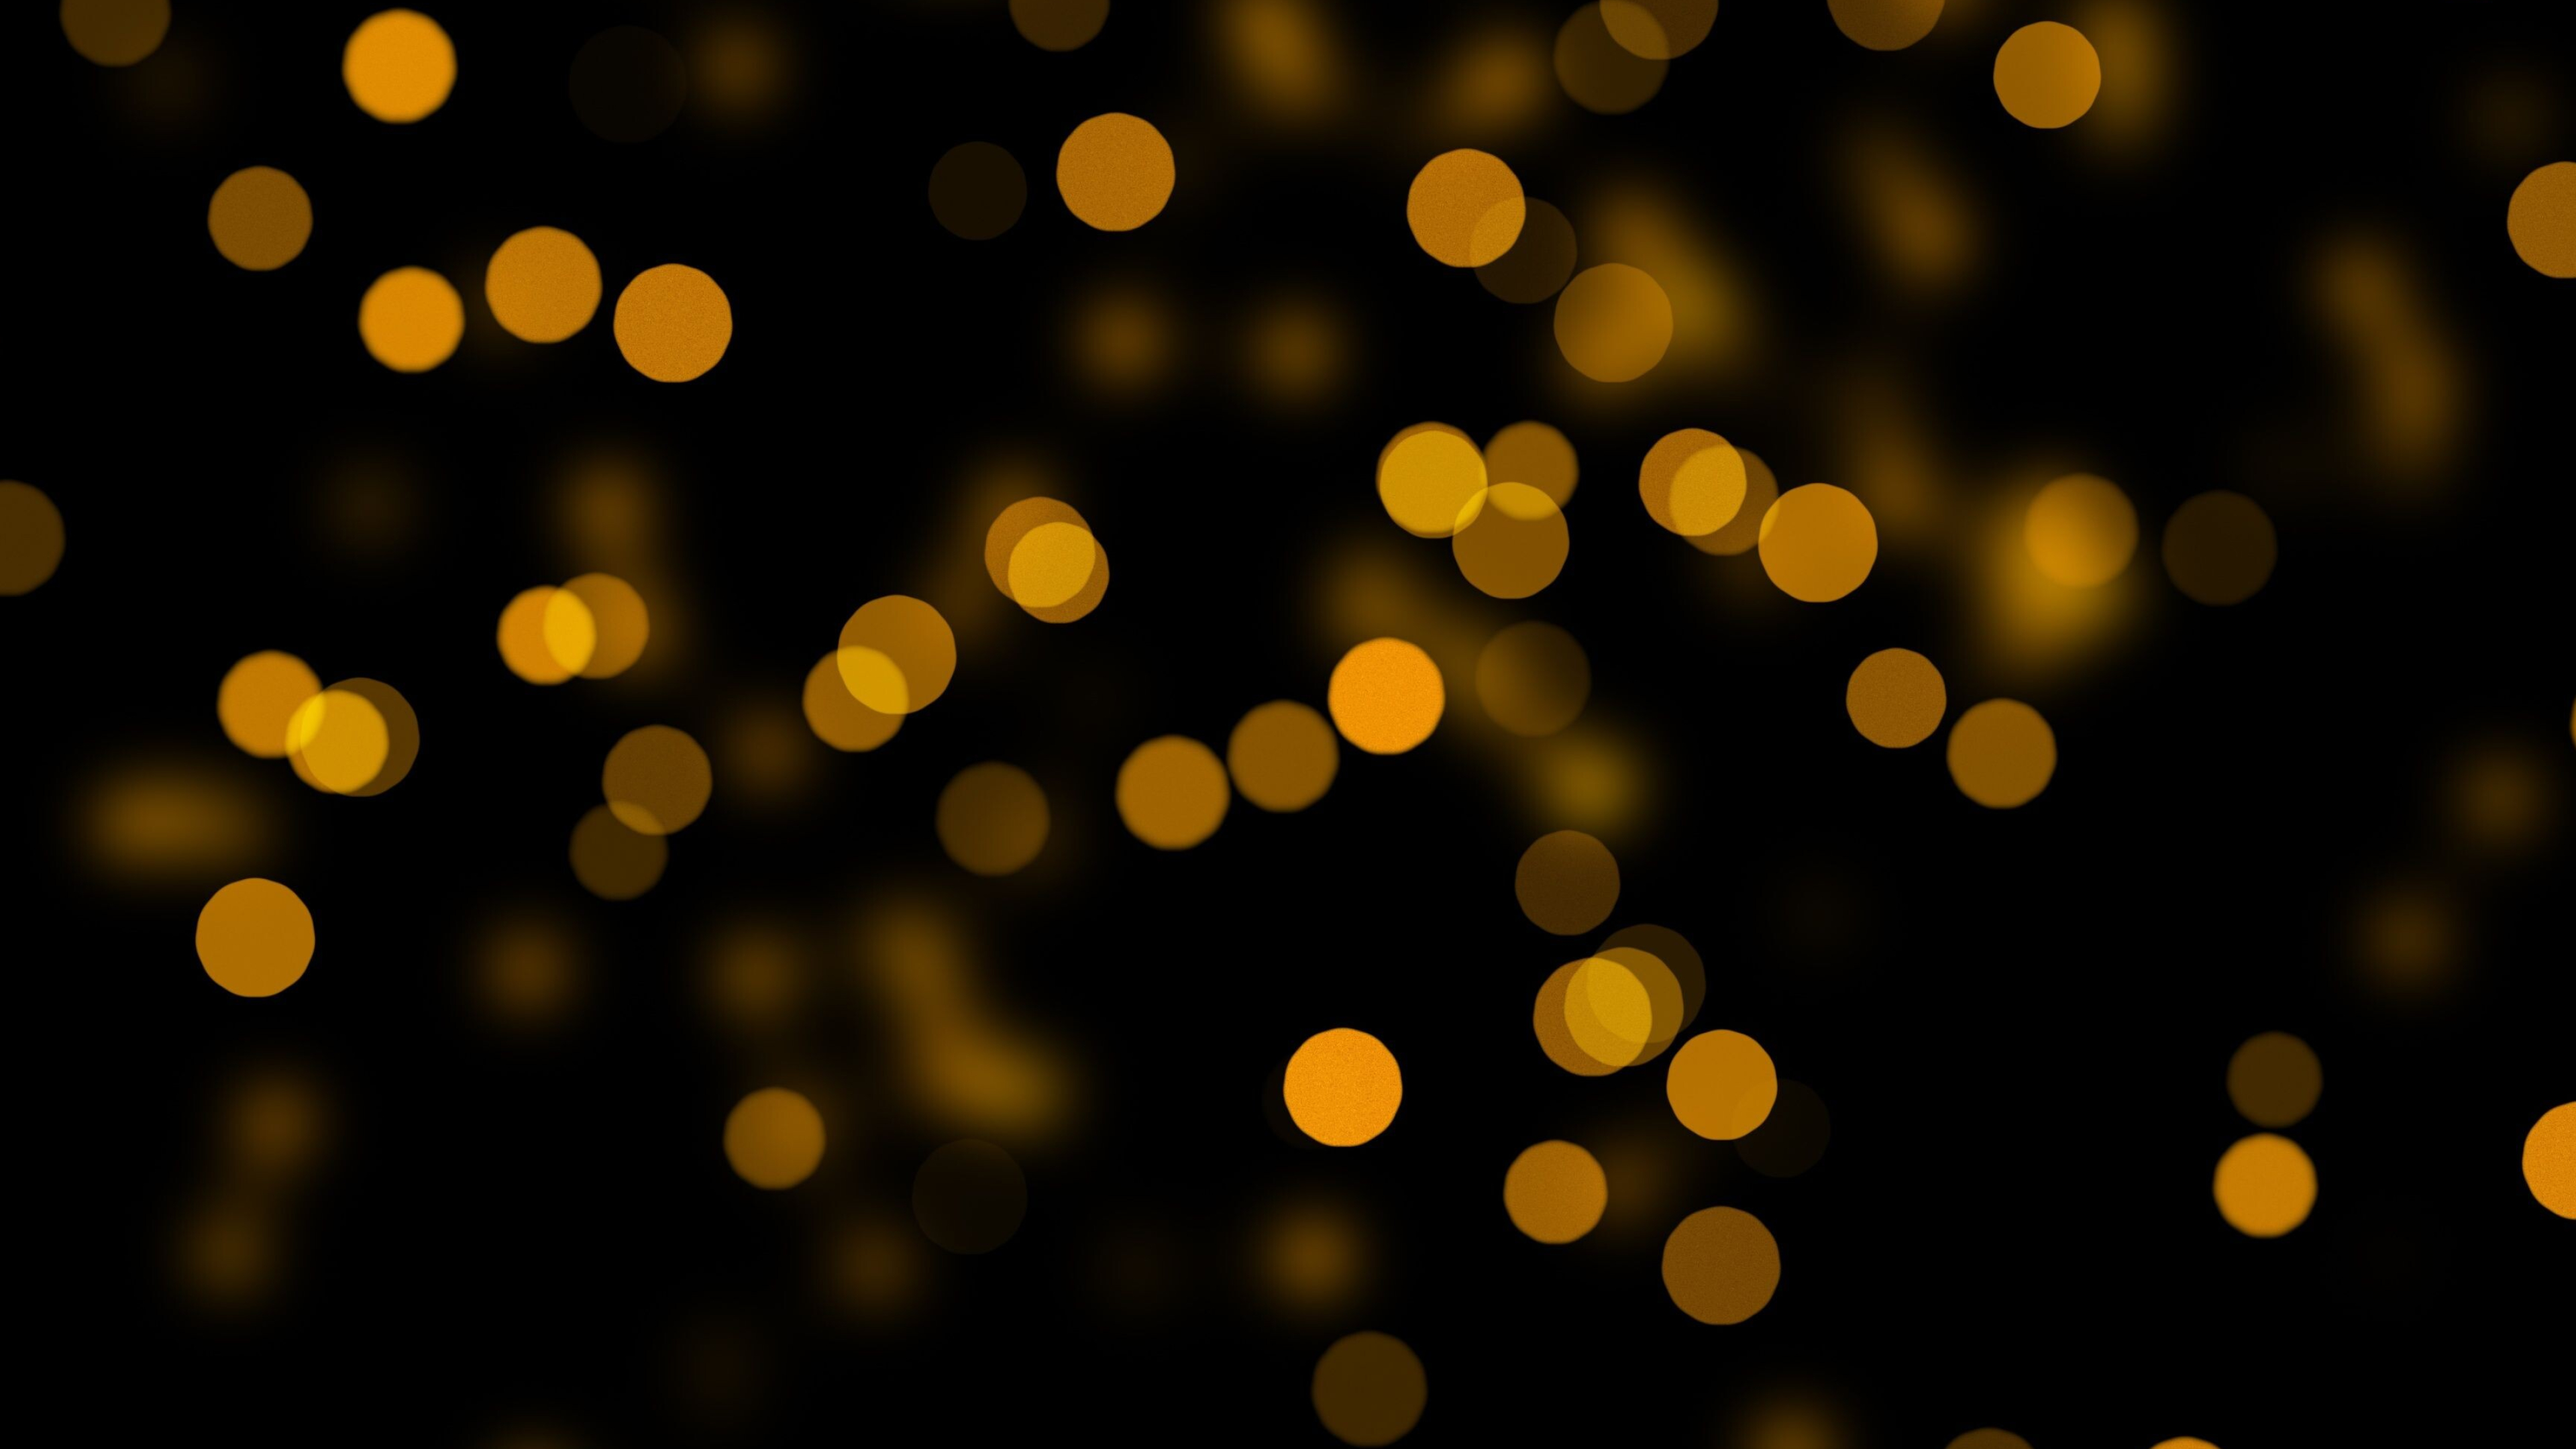 Gold Dots: Blurred abstract gold light through the window glass, Bokeh effect, Tints and shades. 3840x2160 4K Wallpaper.